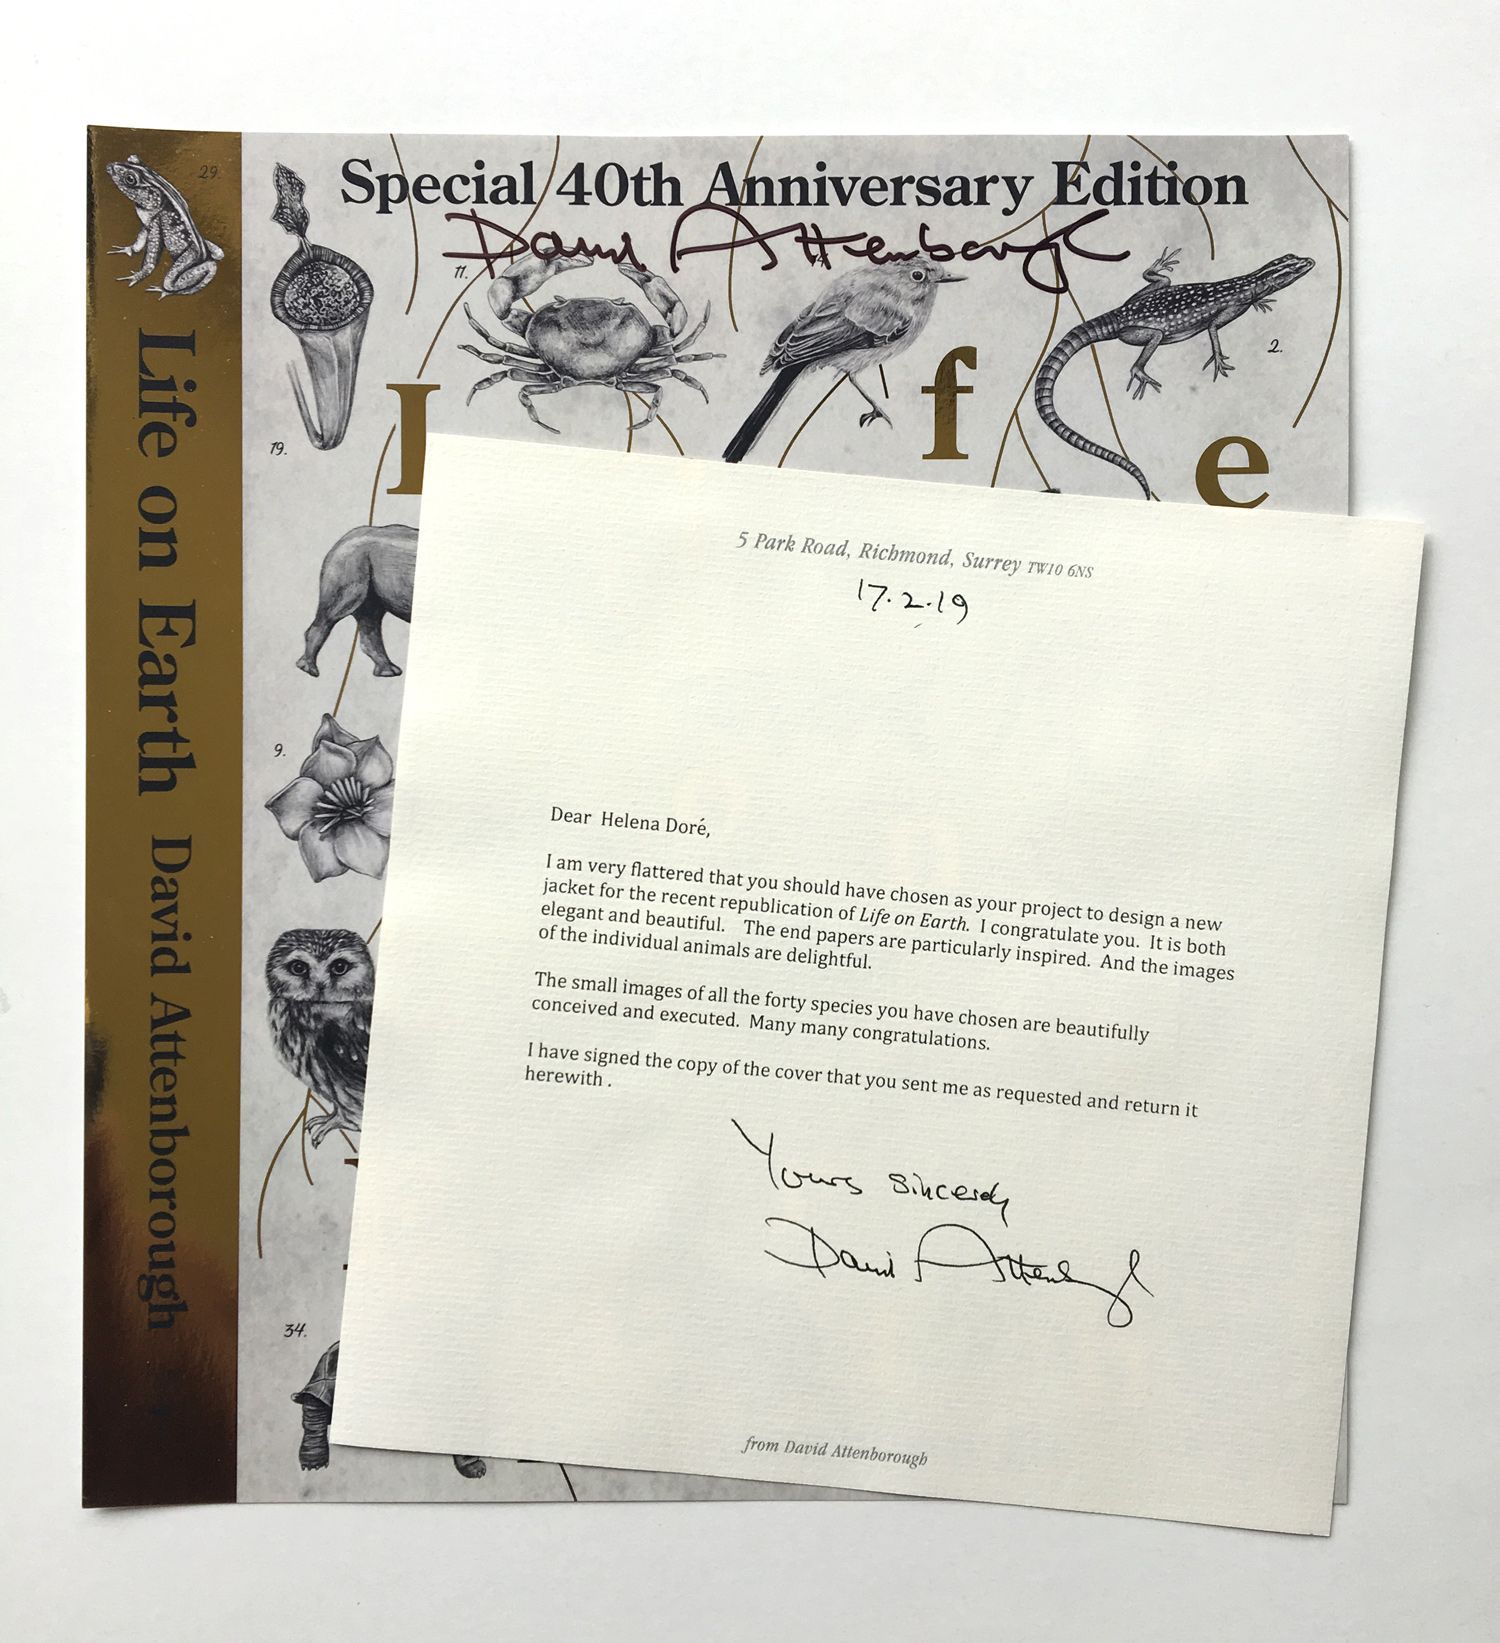 personal illustrated book cover of sir david attenborough‘s ‘life on earth’ signed by david attenborough designed and illustrated by helena dore illustration and design